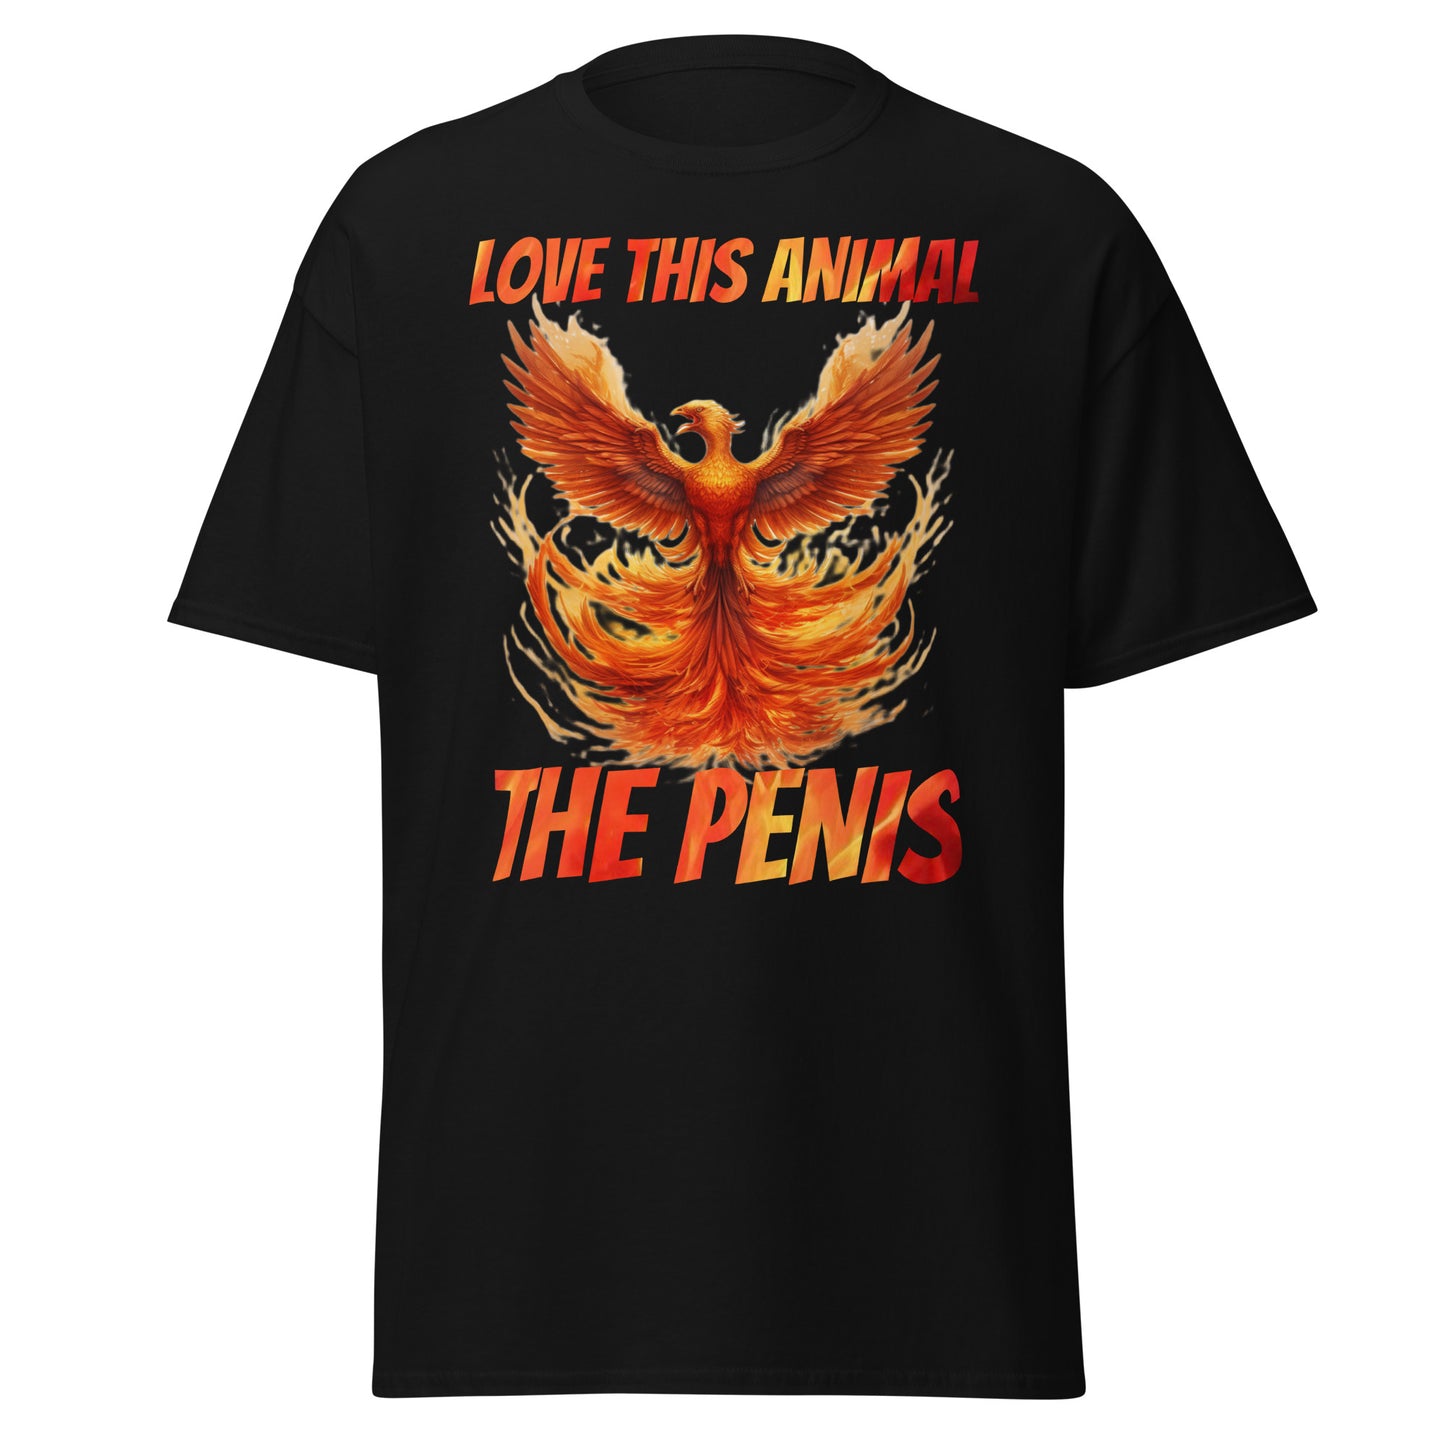 Love this animal the penis